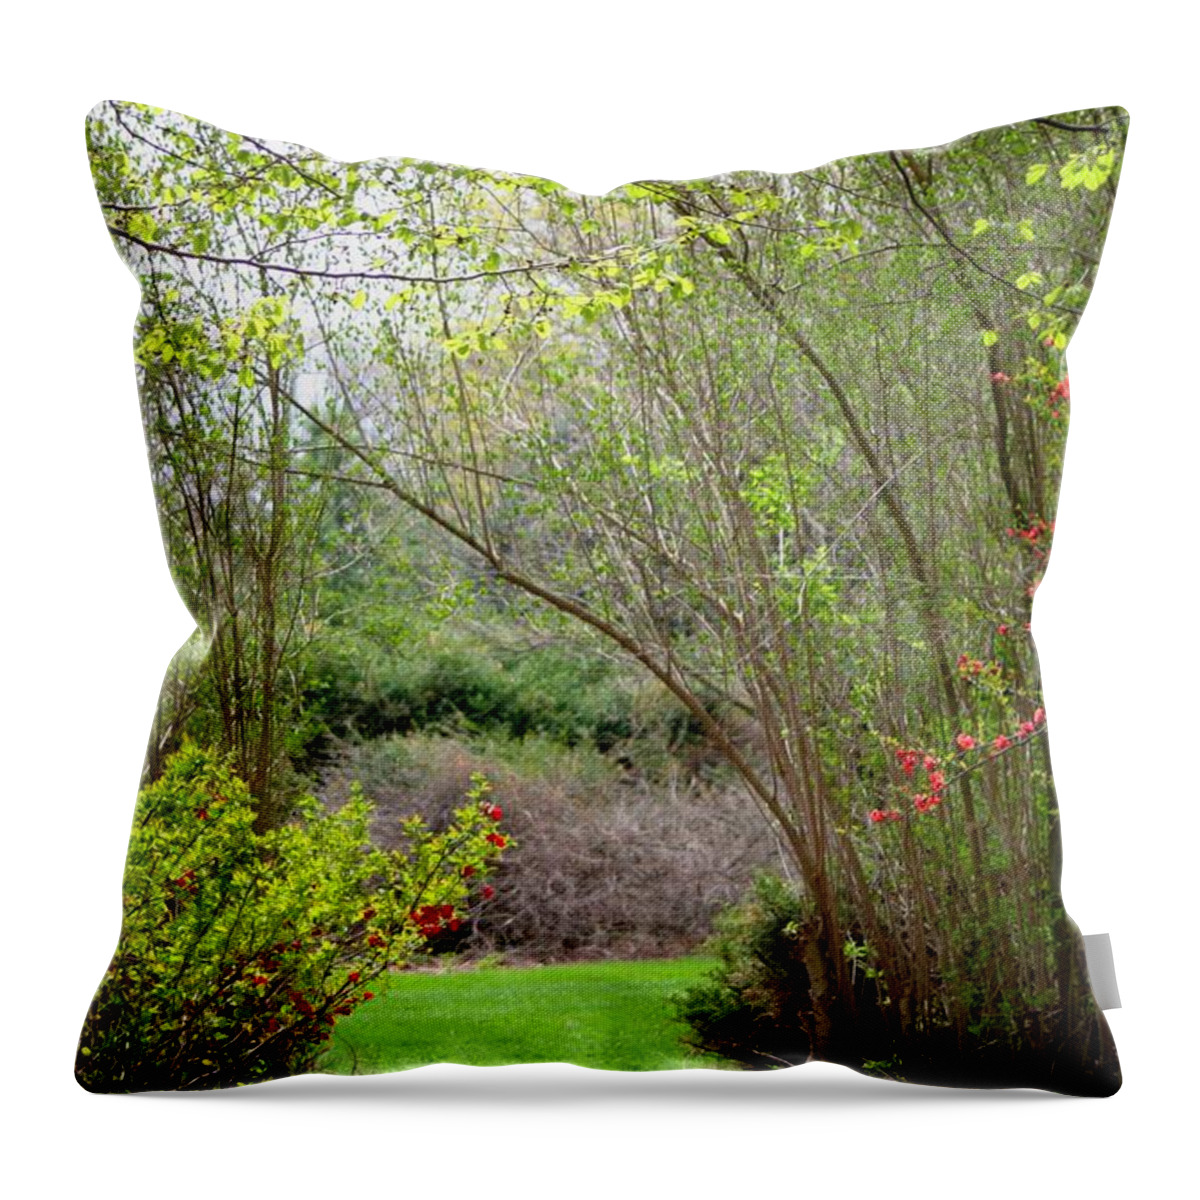 Spring Throw Pillow featuring the photograph Spring Stroll #1 by Living Color Photography Lorraine Lynch